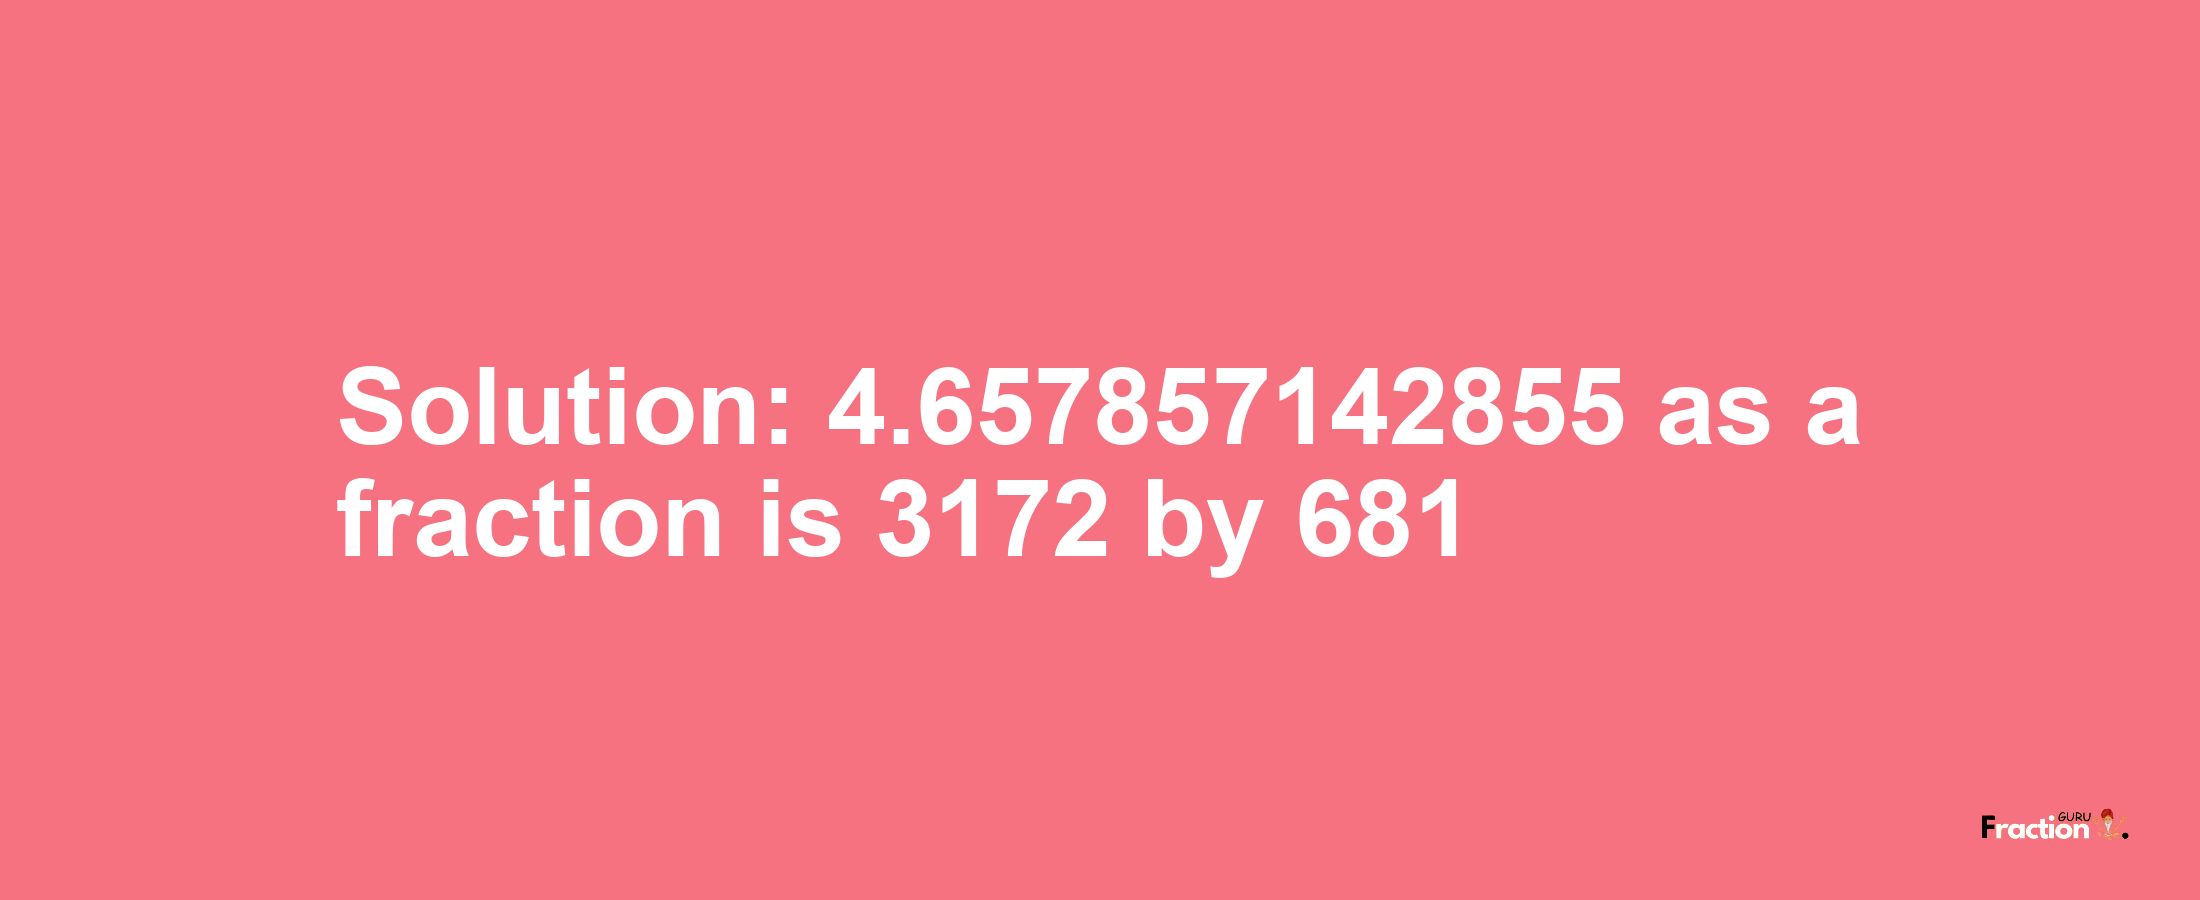 Solution:4.657857142855 as a fraction is 3172/681